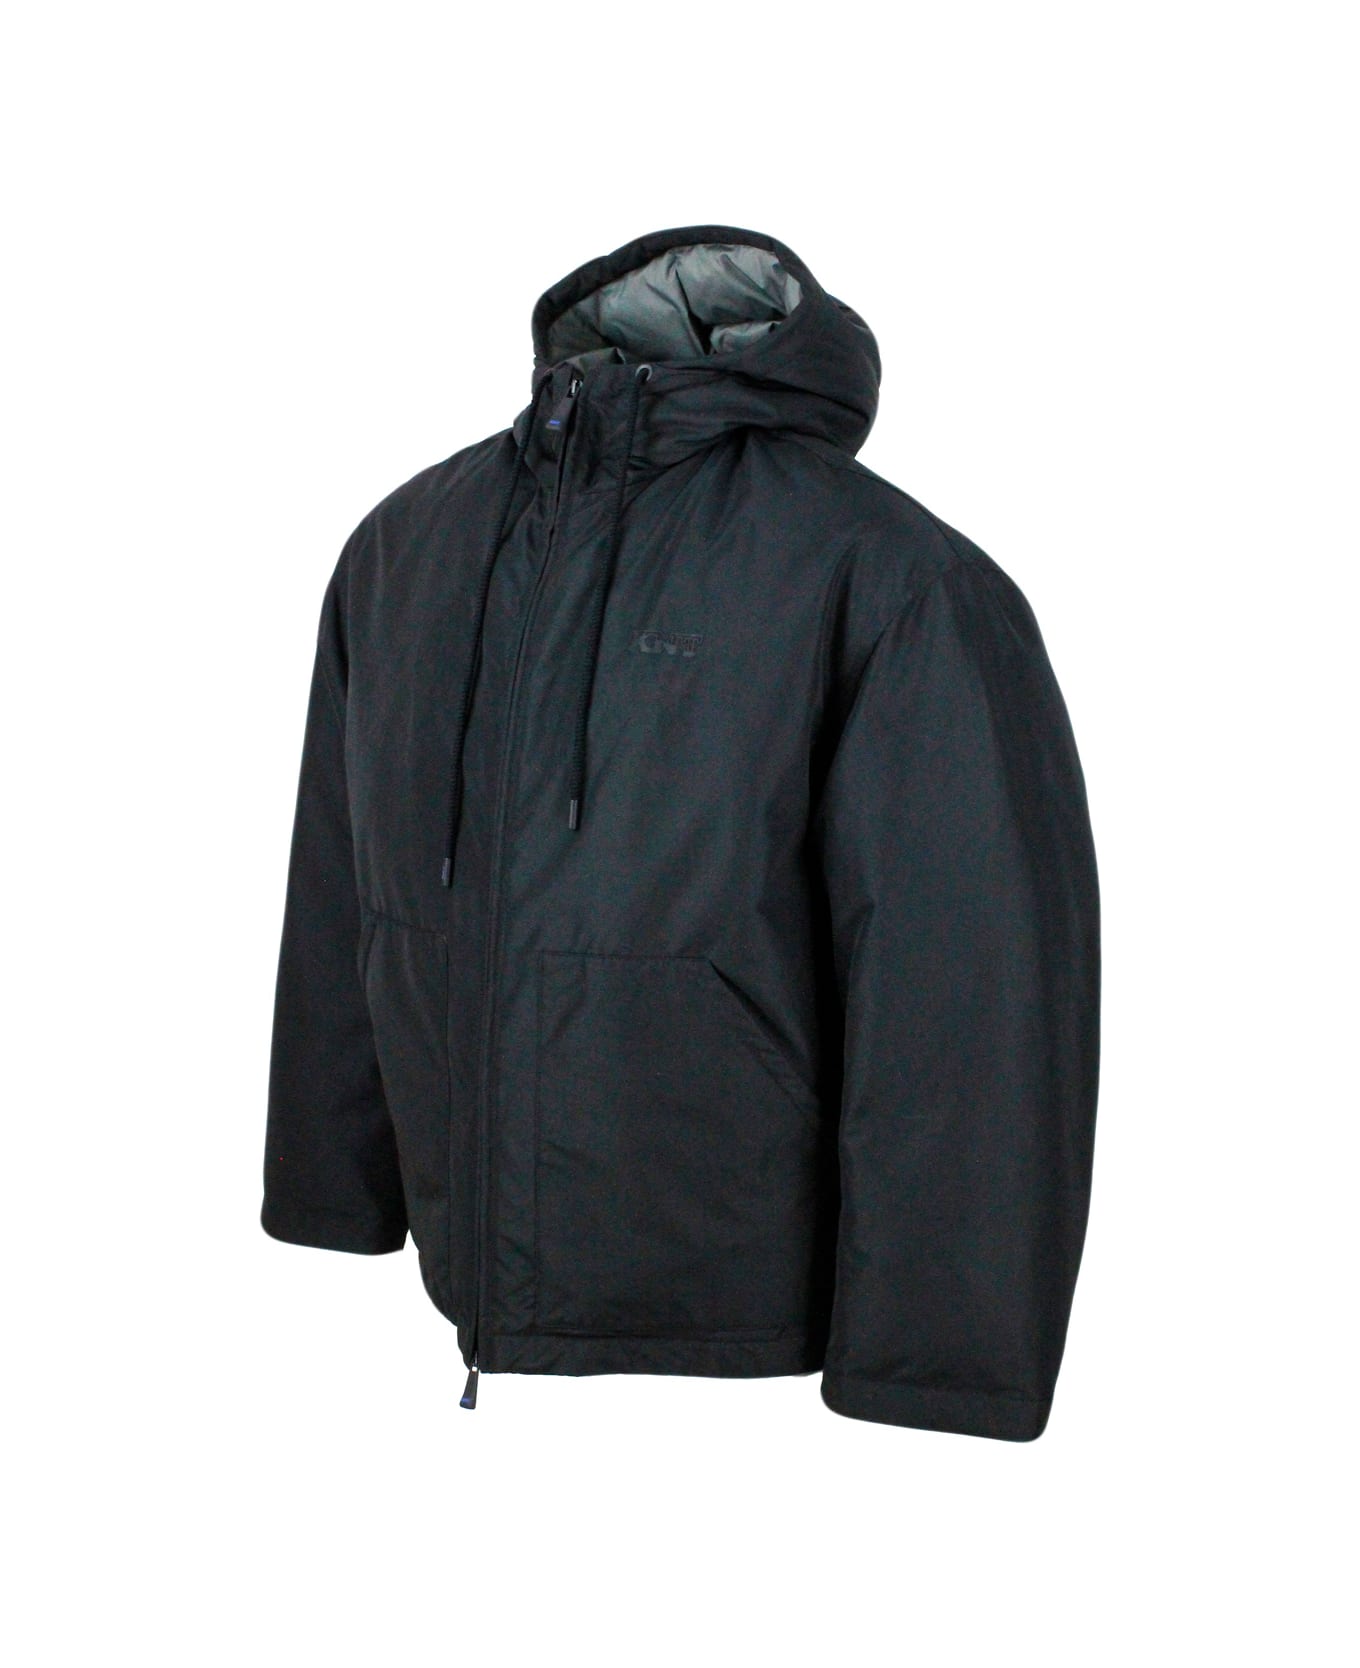 Kiton Knt Down Jacket In Technical Fabric With Hood With Drawstring With Smooth Exterior And Boudin Quilted Interior In Contrasting Color. Small Matching Lo - Black ダウンジャケット